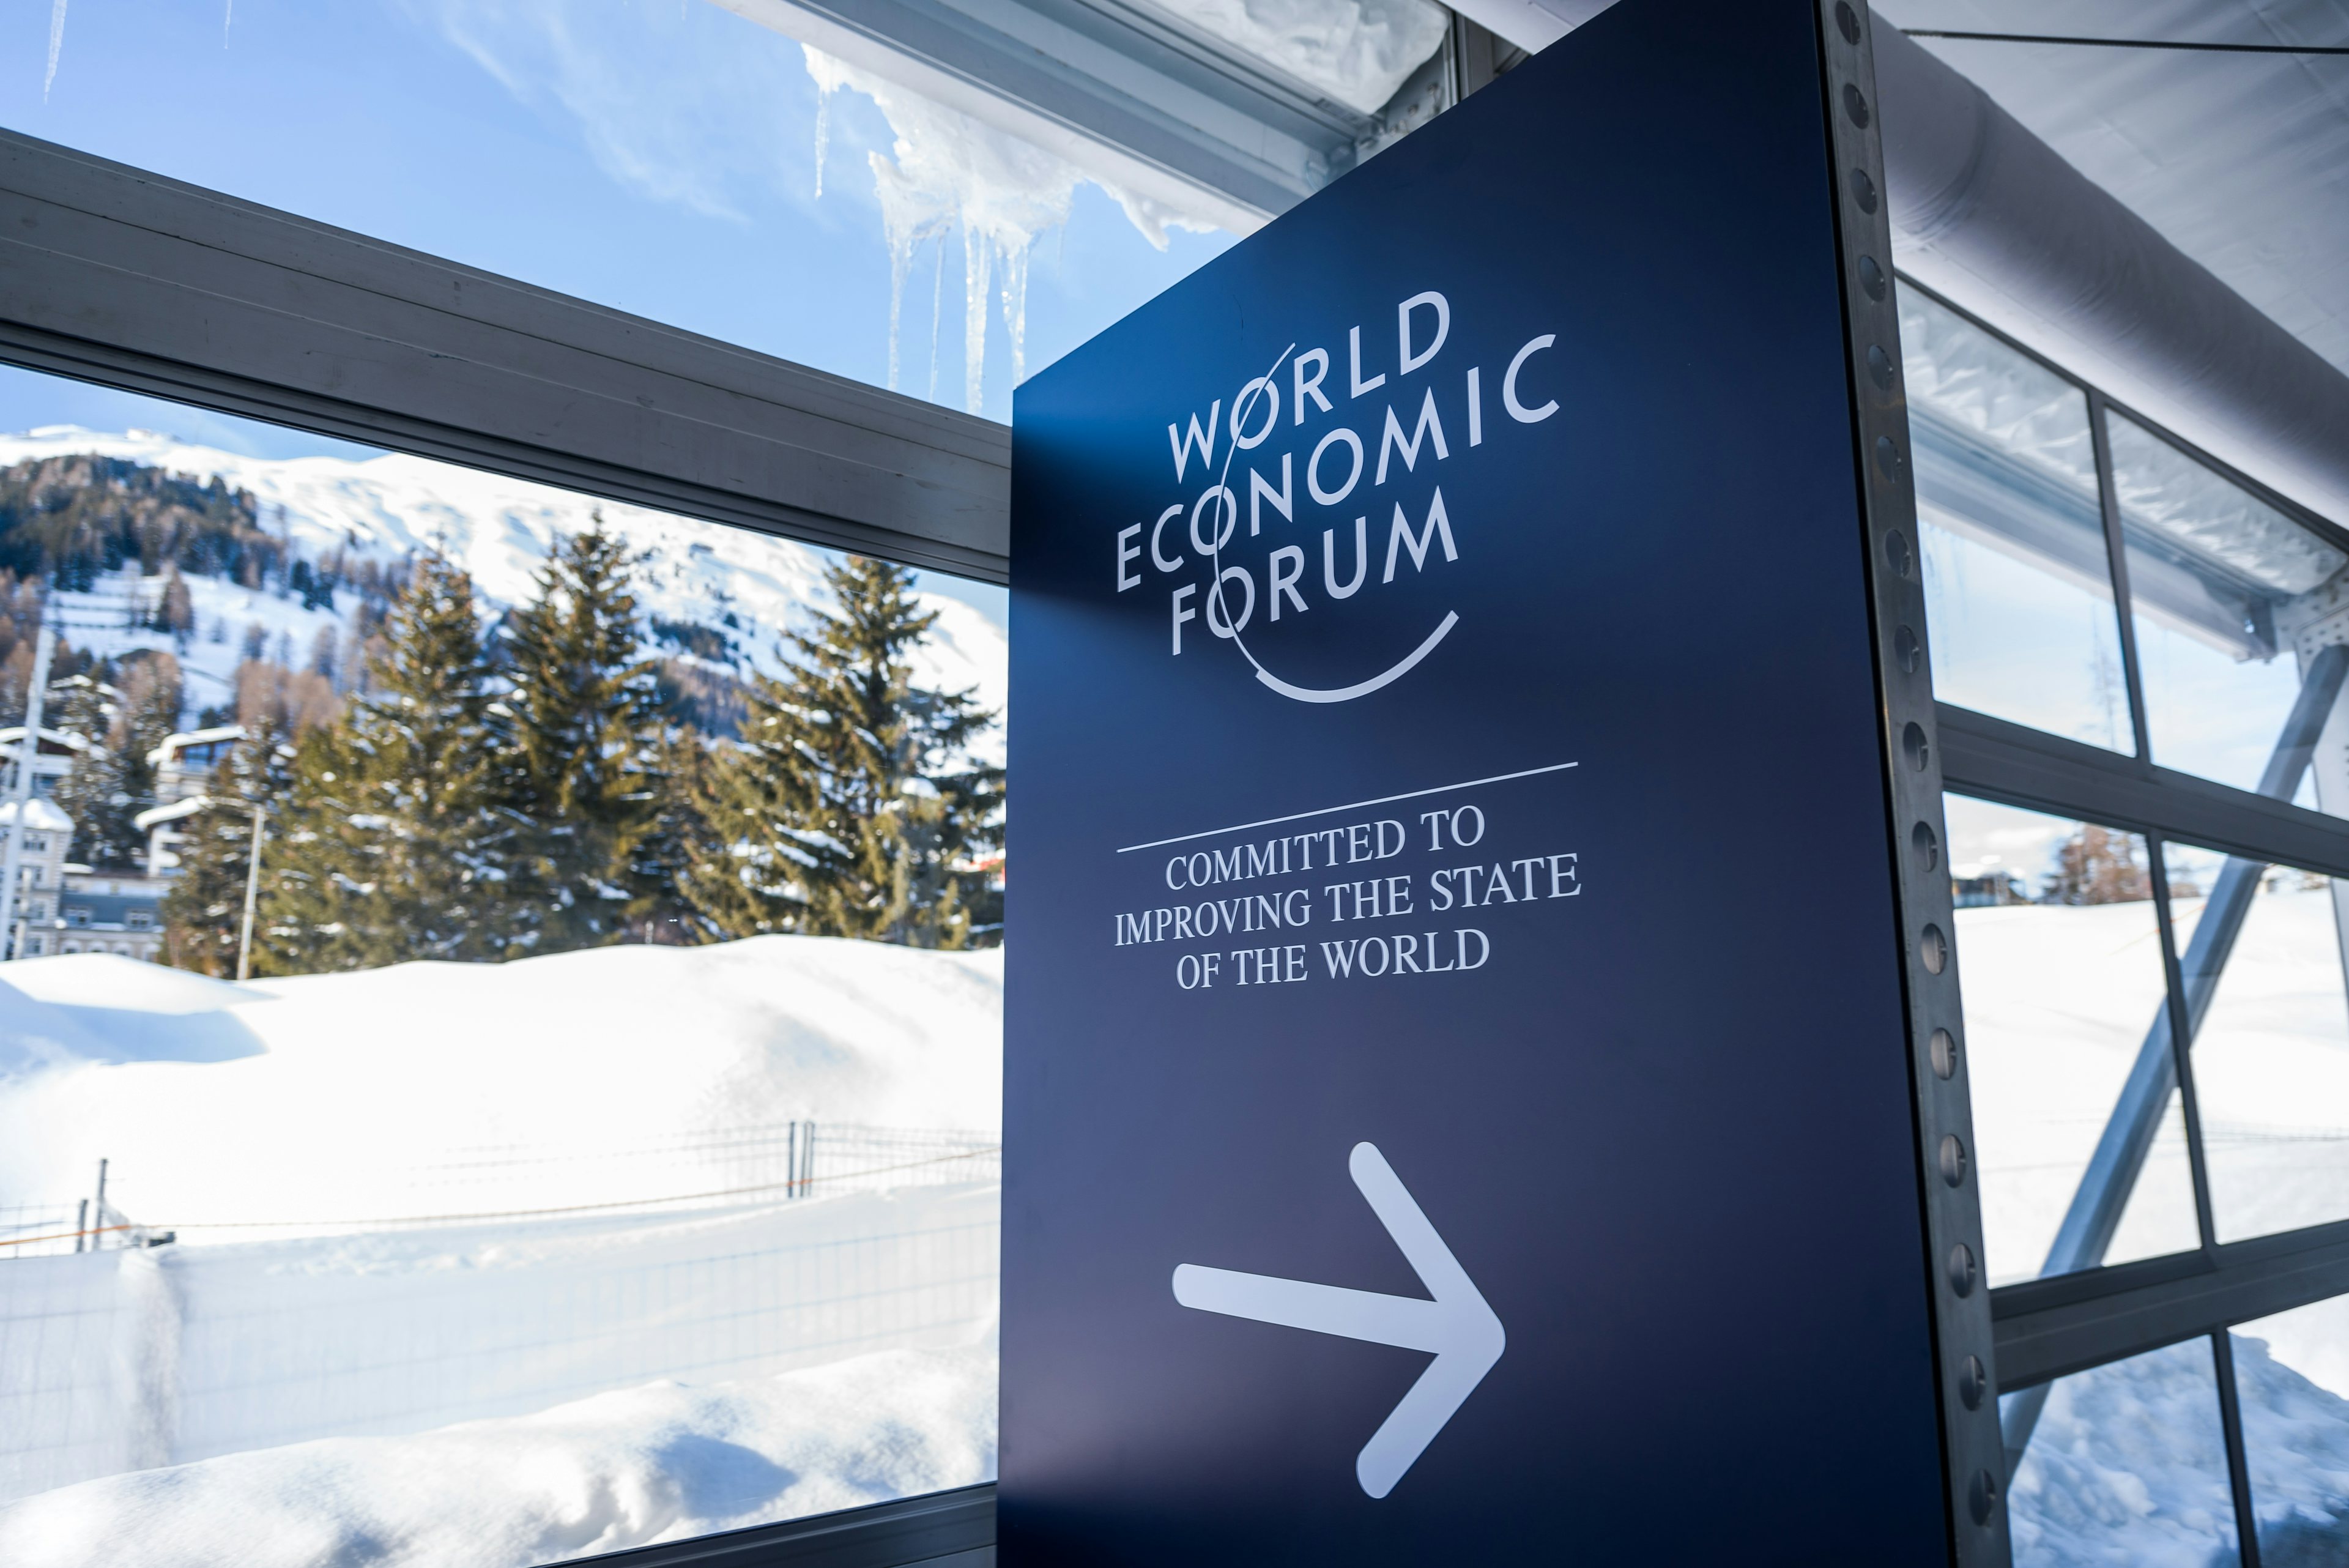 Davos is home to the World Economic Forum's annual meeting each January. Image: Shutterstock